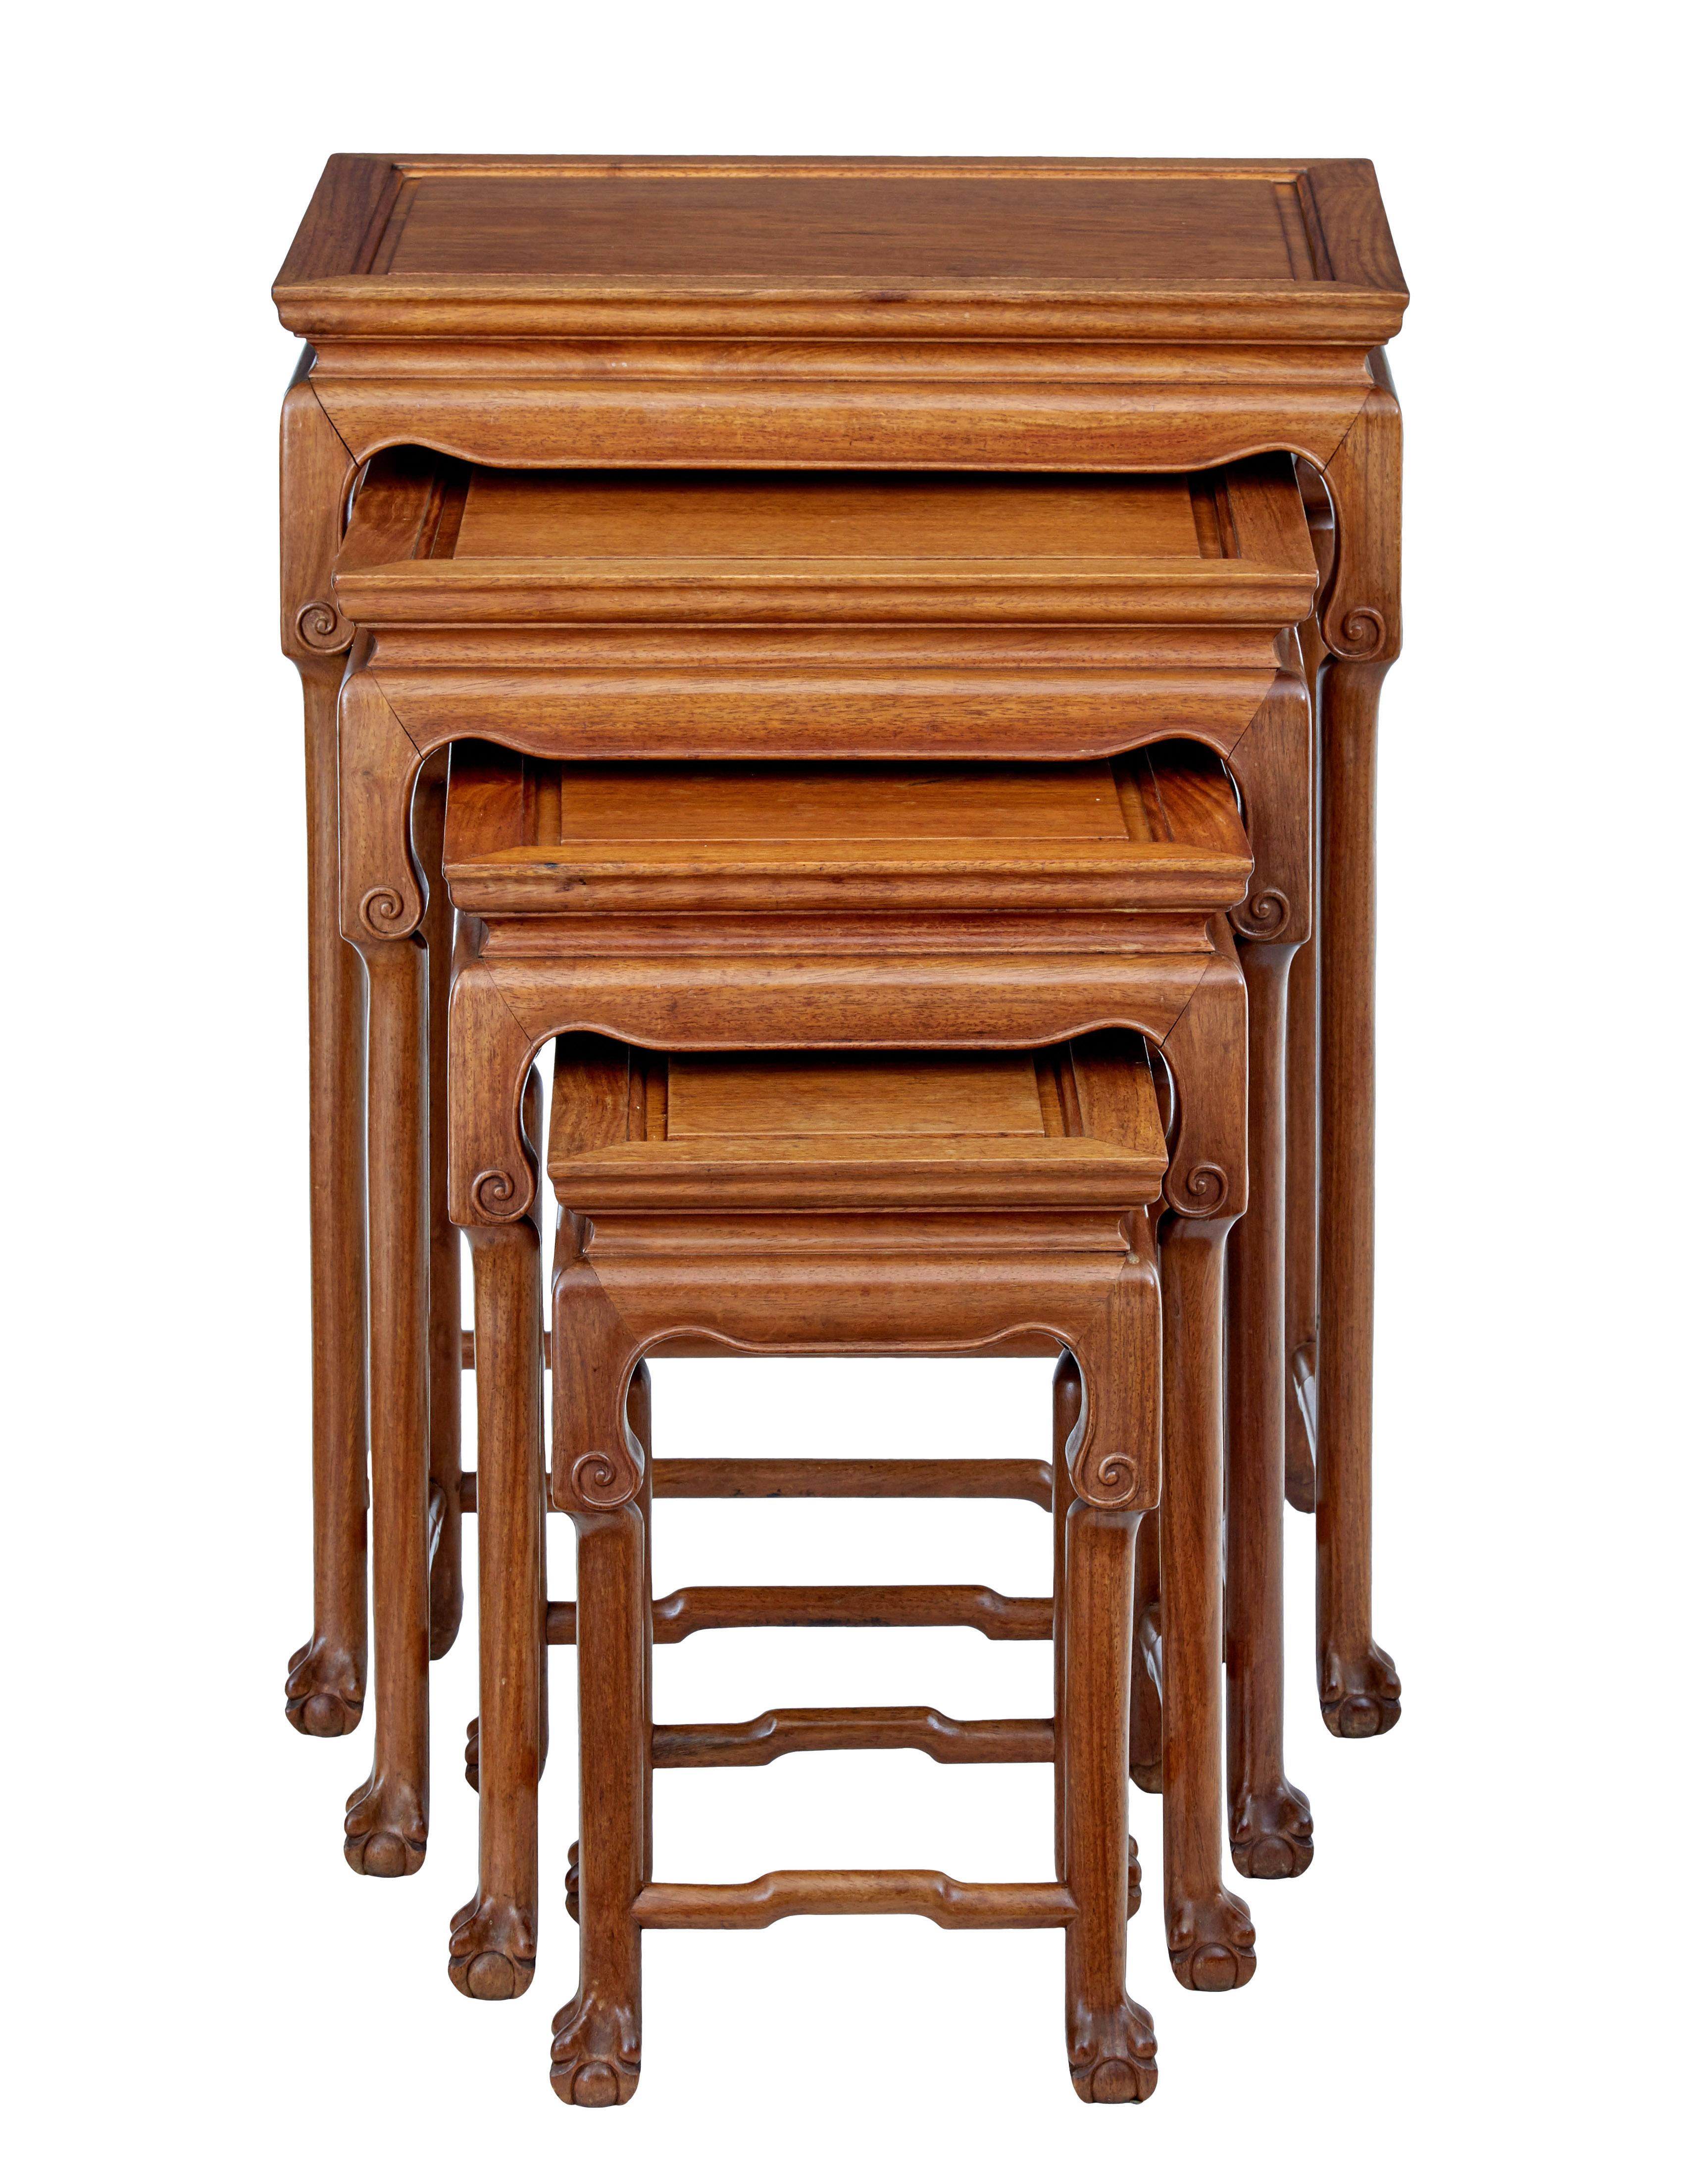 Hand-Carved Nest of 4 hardwood Chinese tables by mayfair and company For Sale